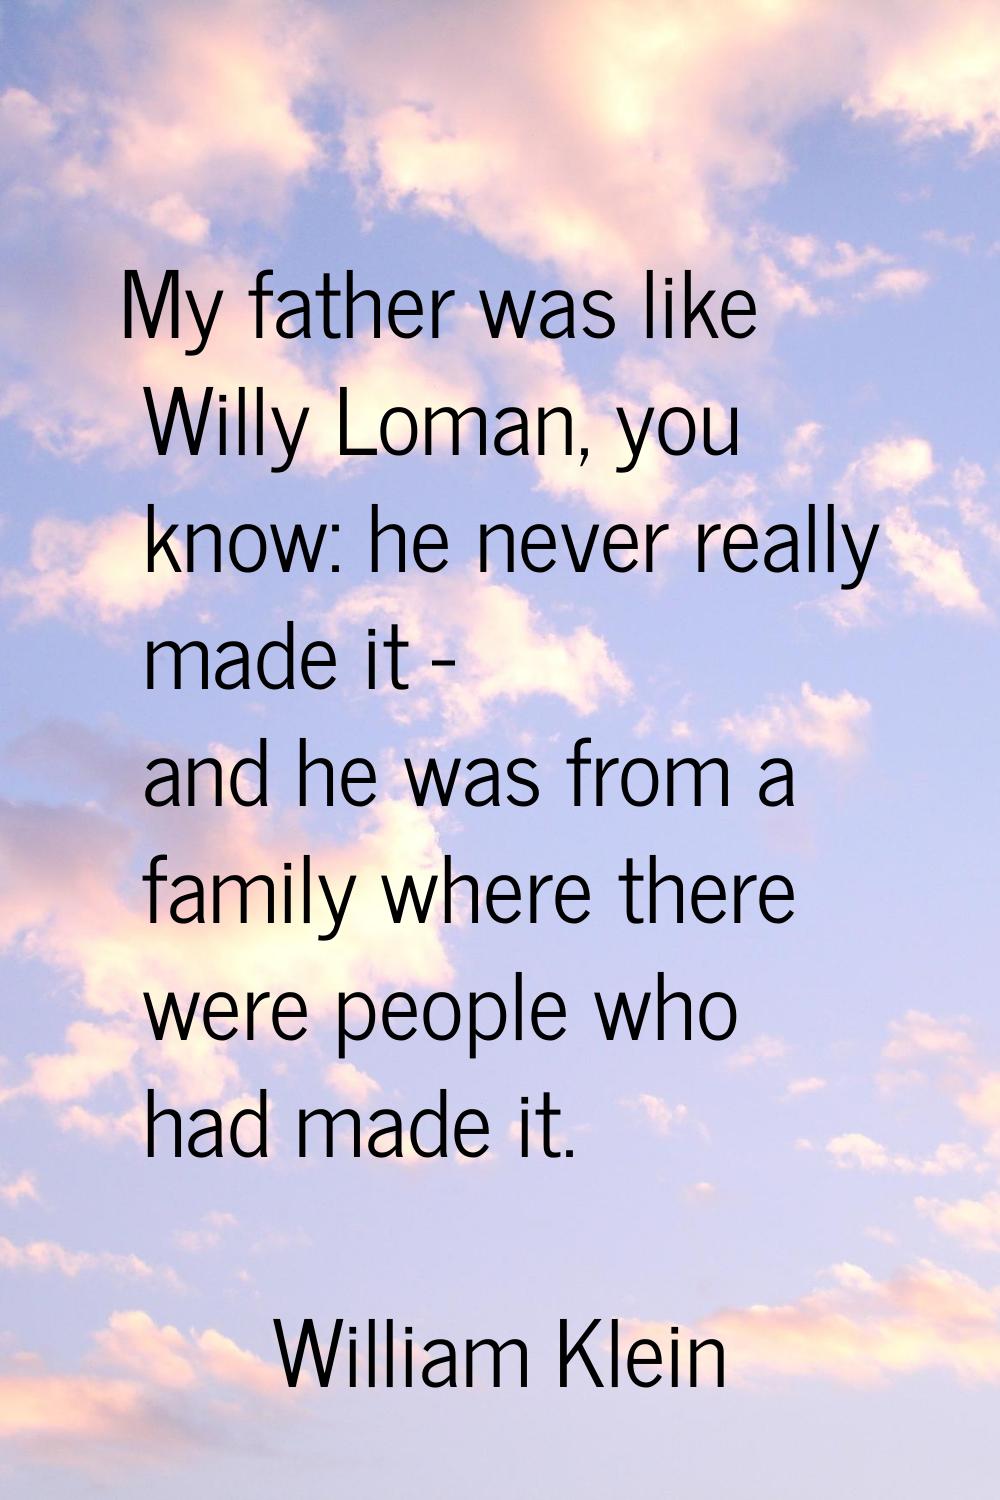 My father was like Willy Loman, you know: he never really made it - and he was from a family where 